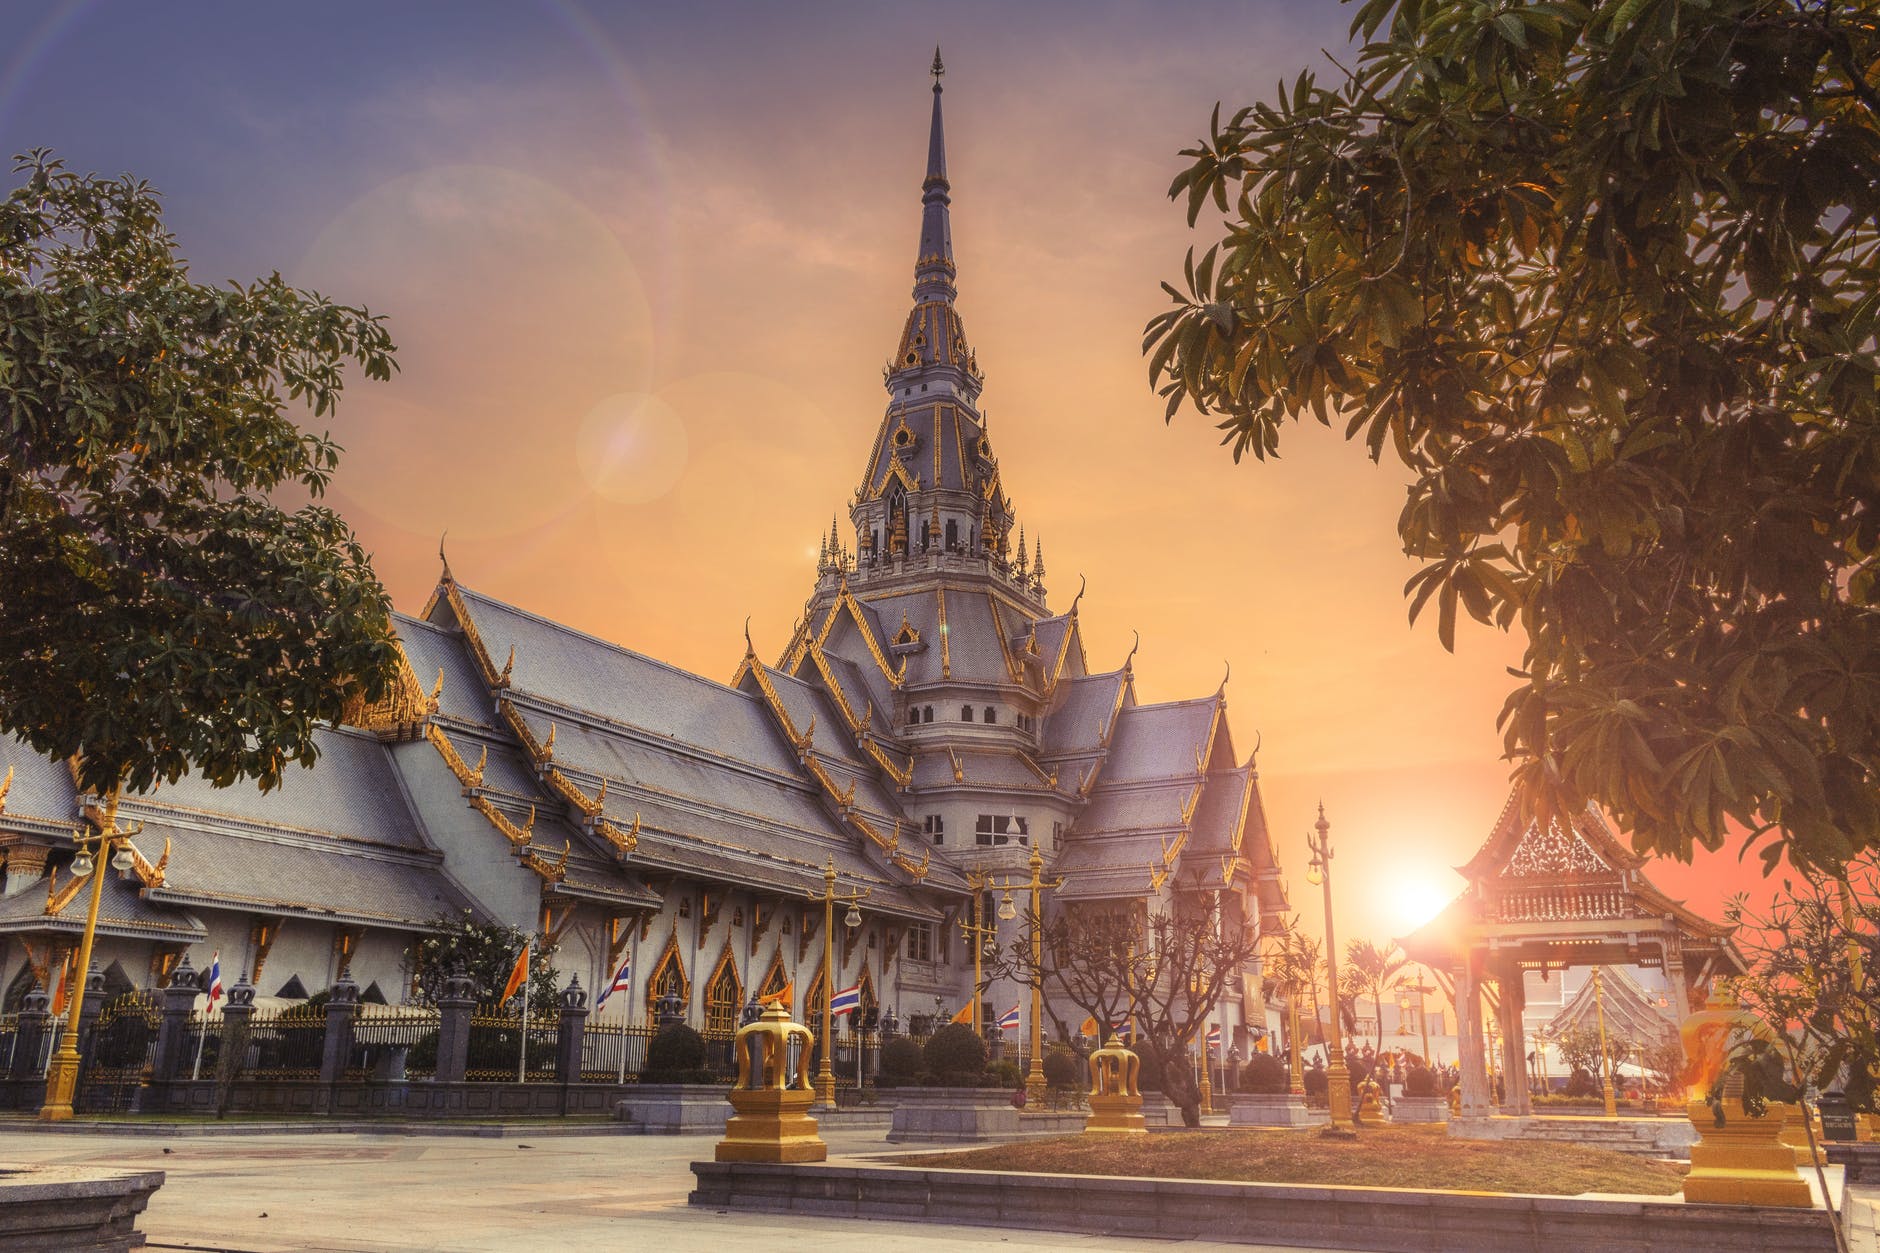 temple in Thailand